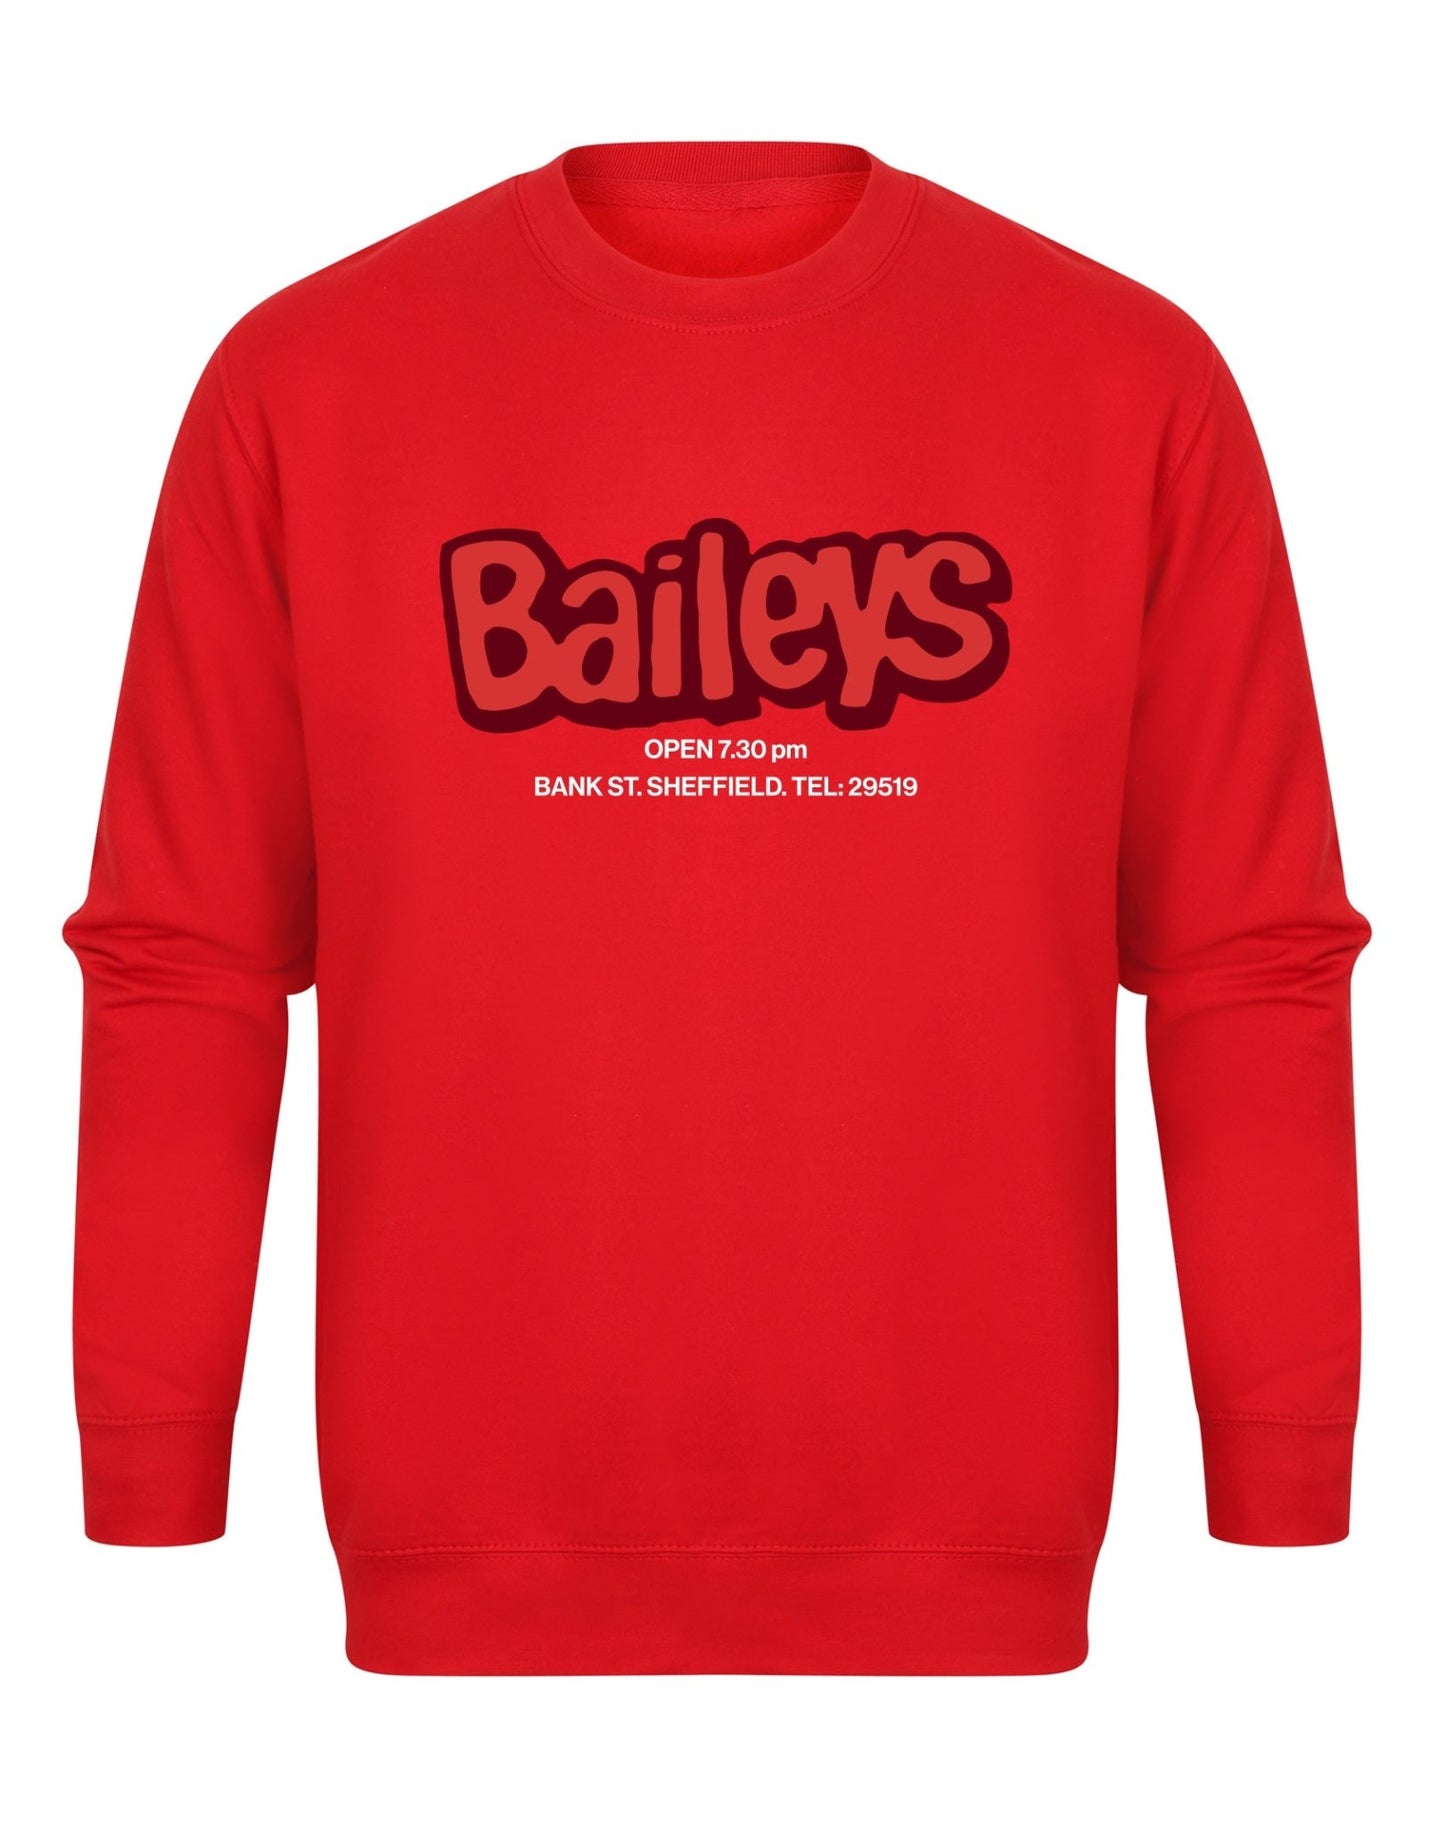 Baileys unisex fit sweatshirt - various colours - Dirty Stop Outs